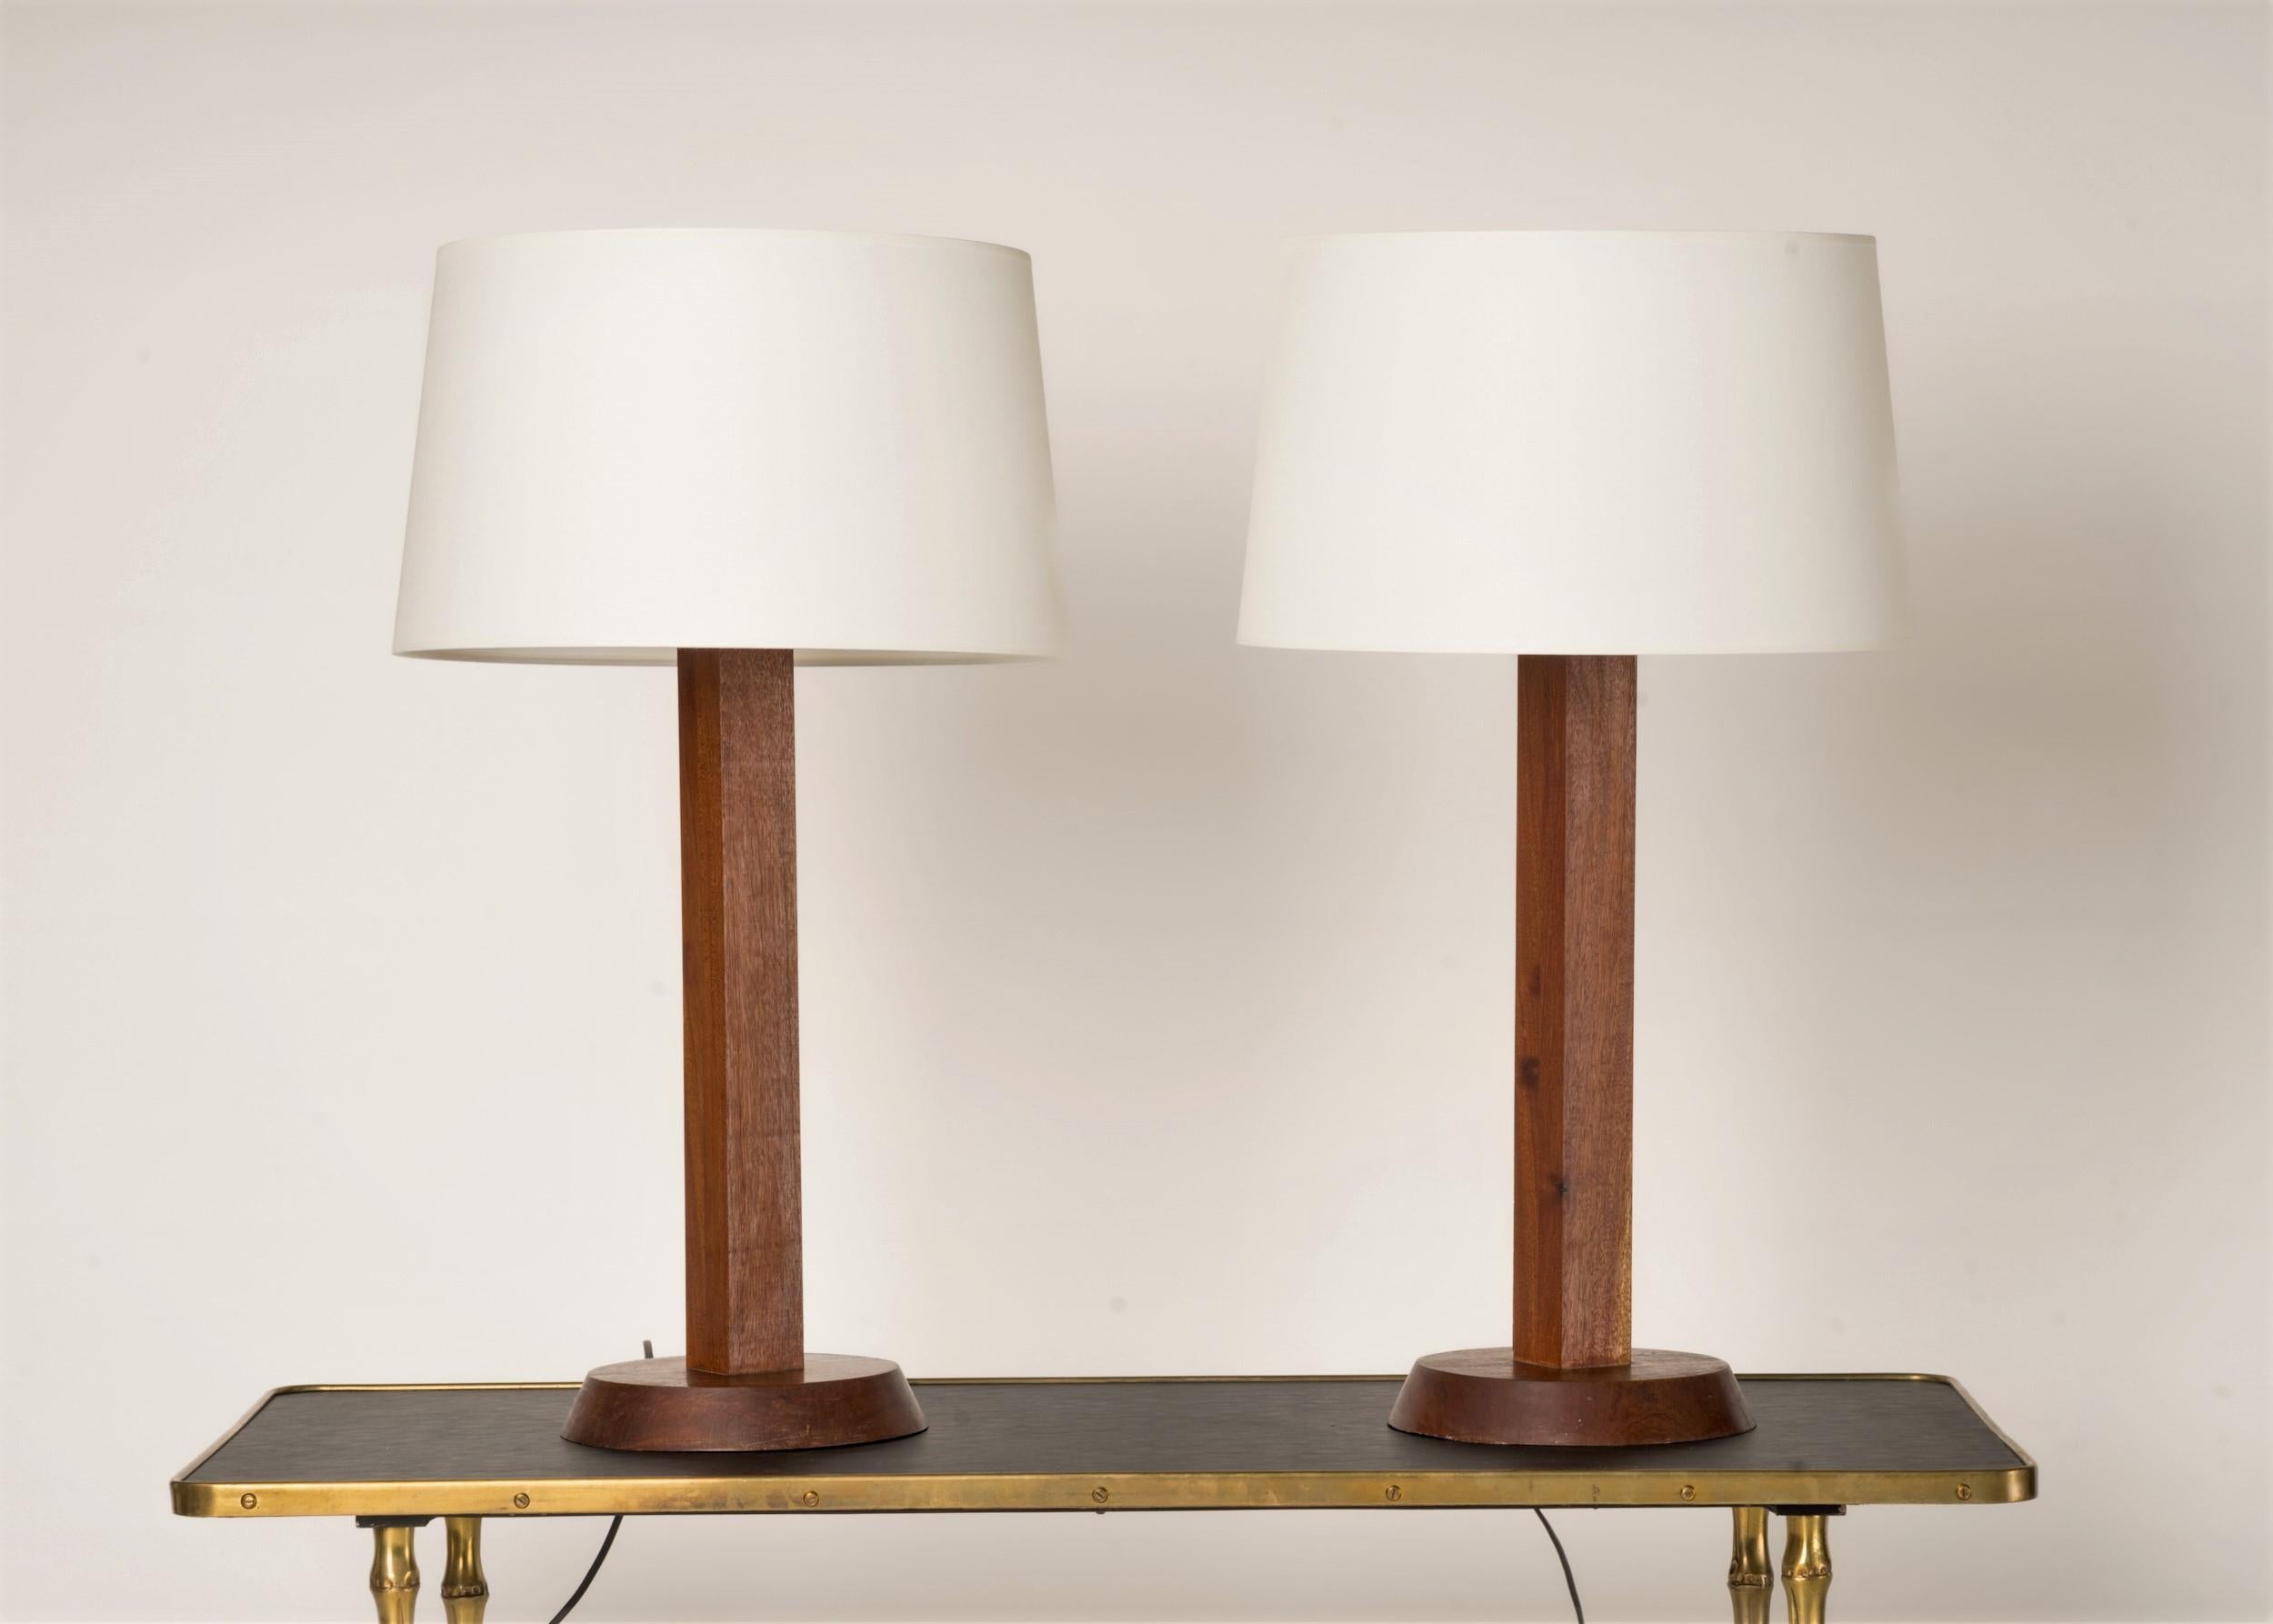 Pair of elegantly crafted table lamps made of solid wood.  The inclined based features a diameter difference between the top and bottom levels which adds a subtle design touch to them.
European sockets and wiring.
These lamps will ship from France